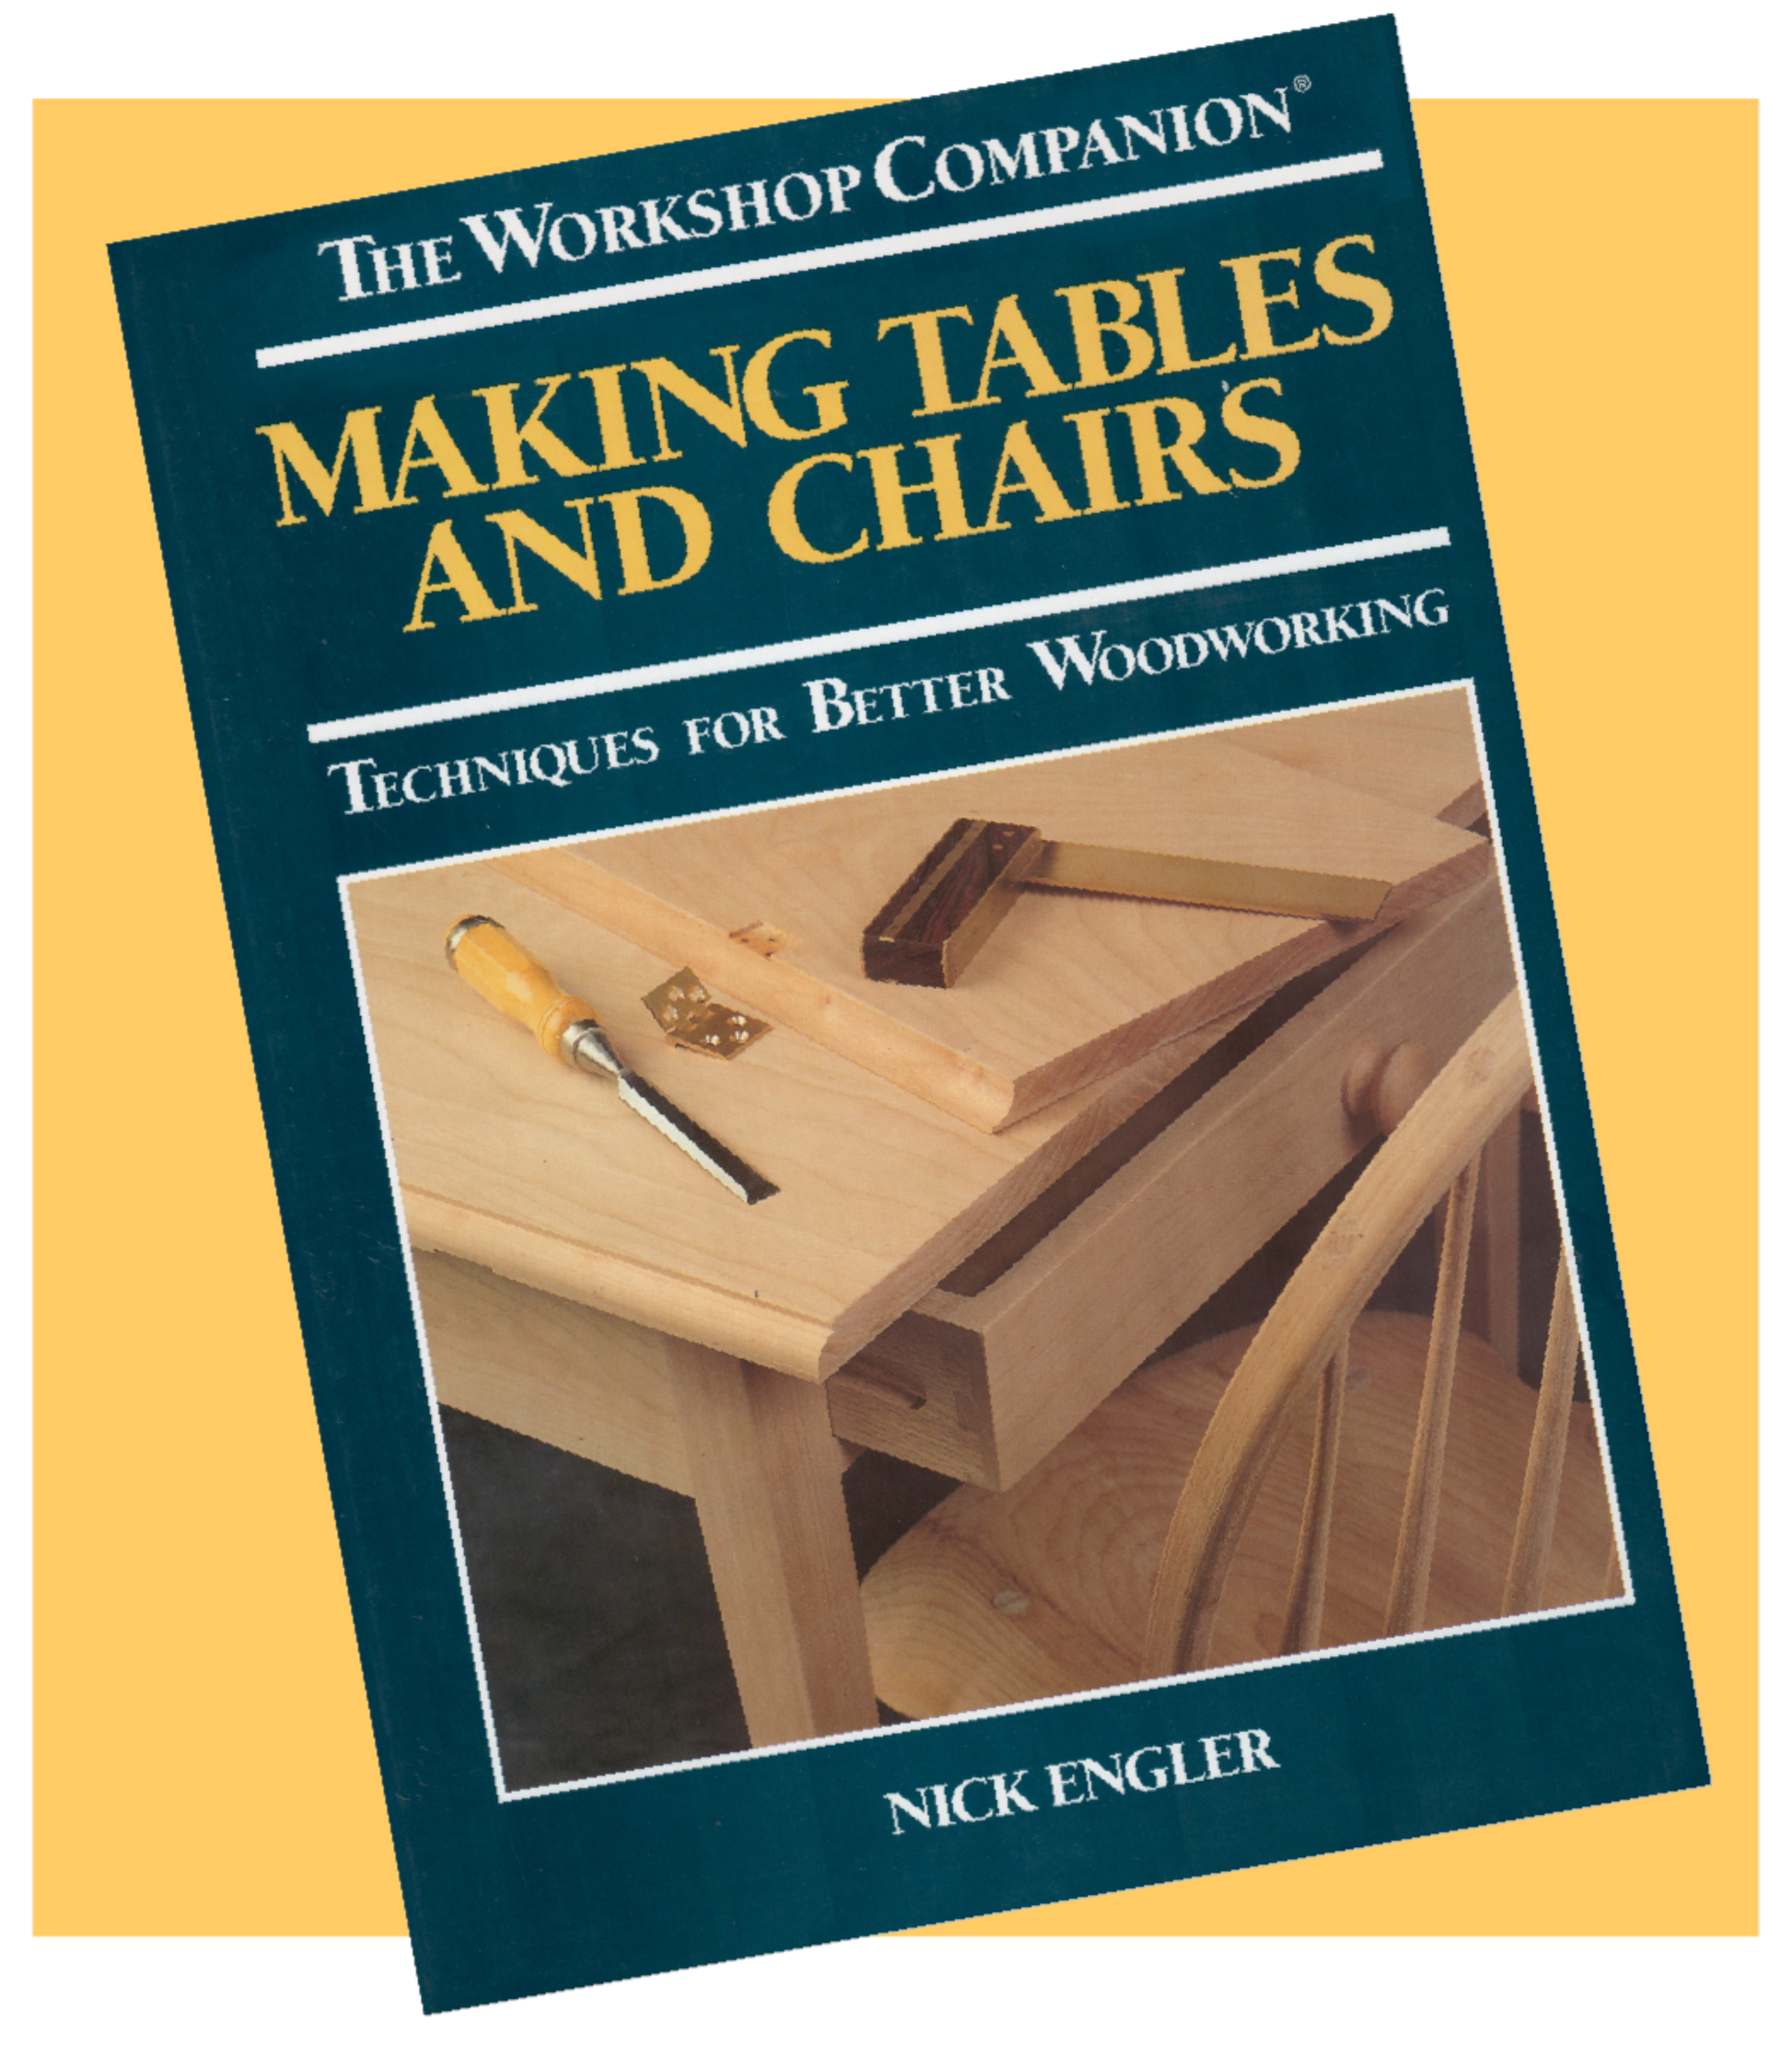 On Making Chairs Comfortable - FineWoodworking